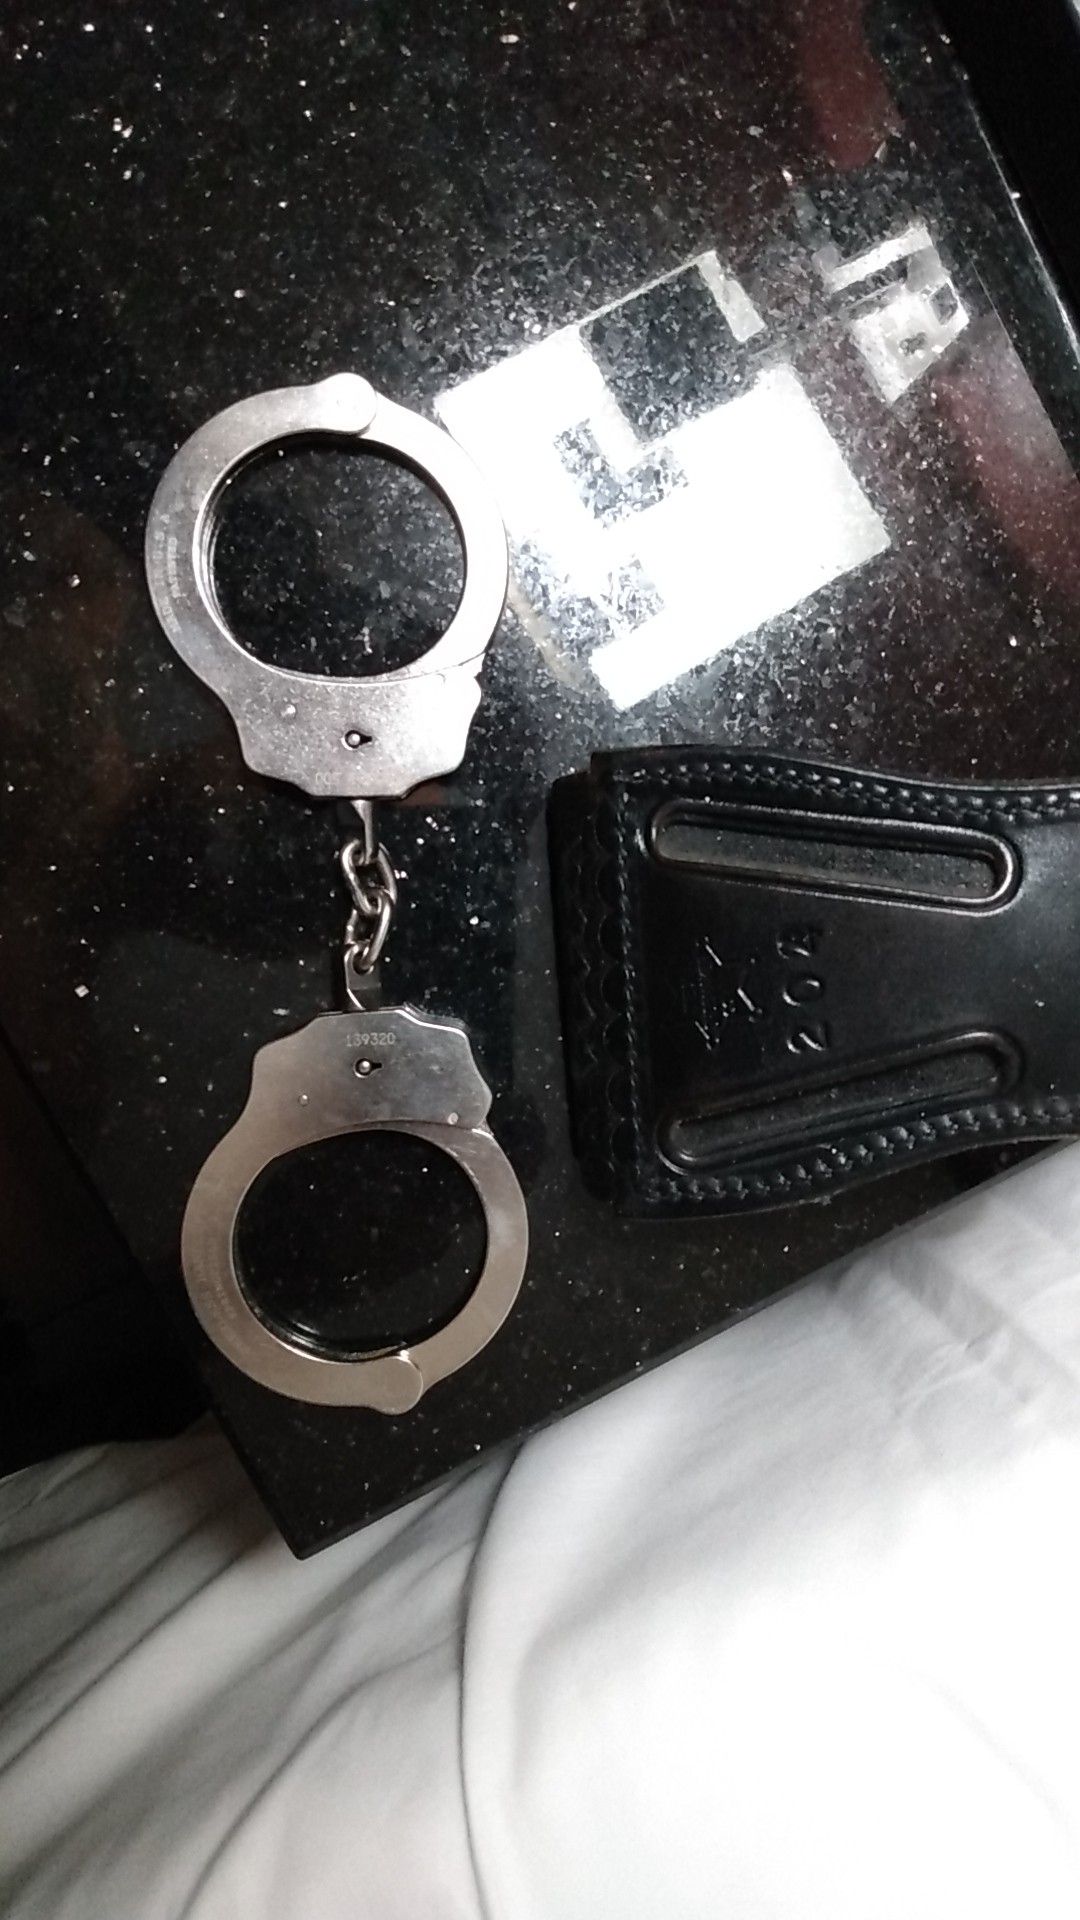 Handcuffs with blk leather case